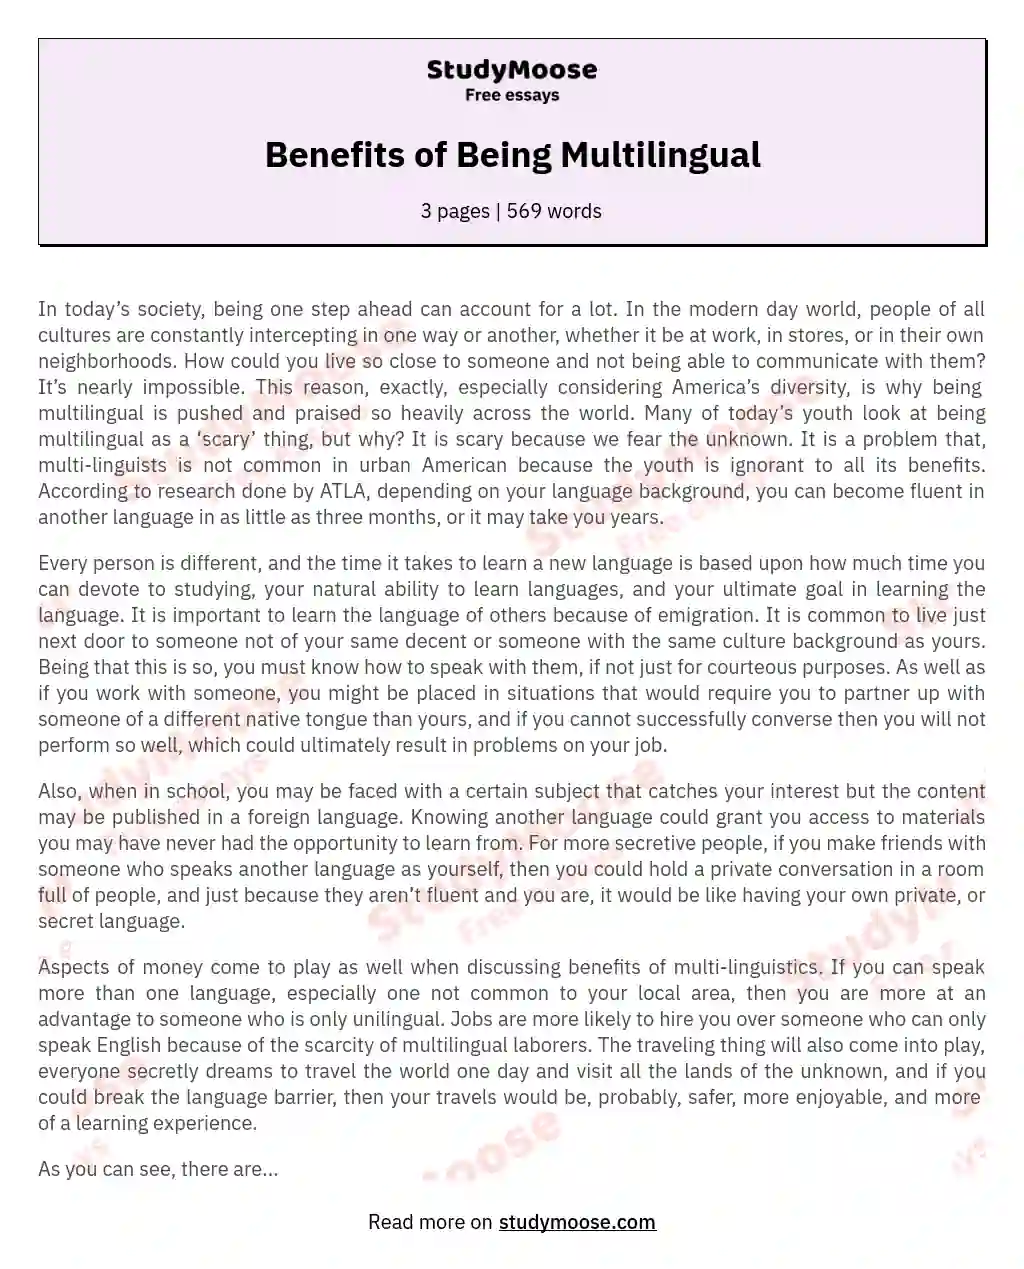 Benefits of Being Multilingual